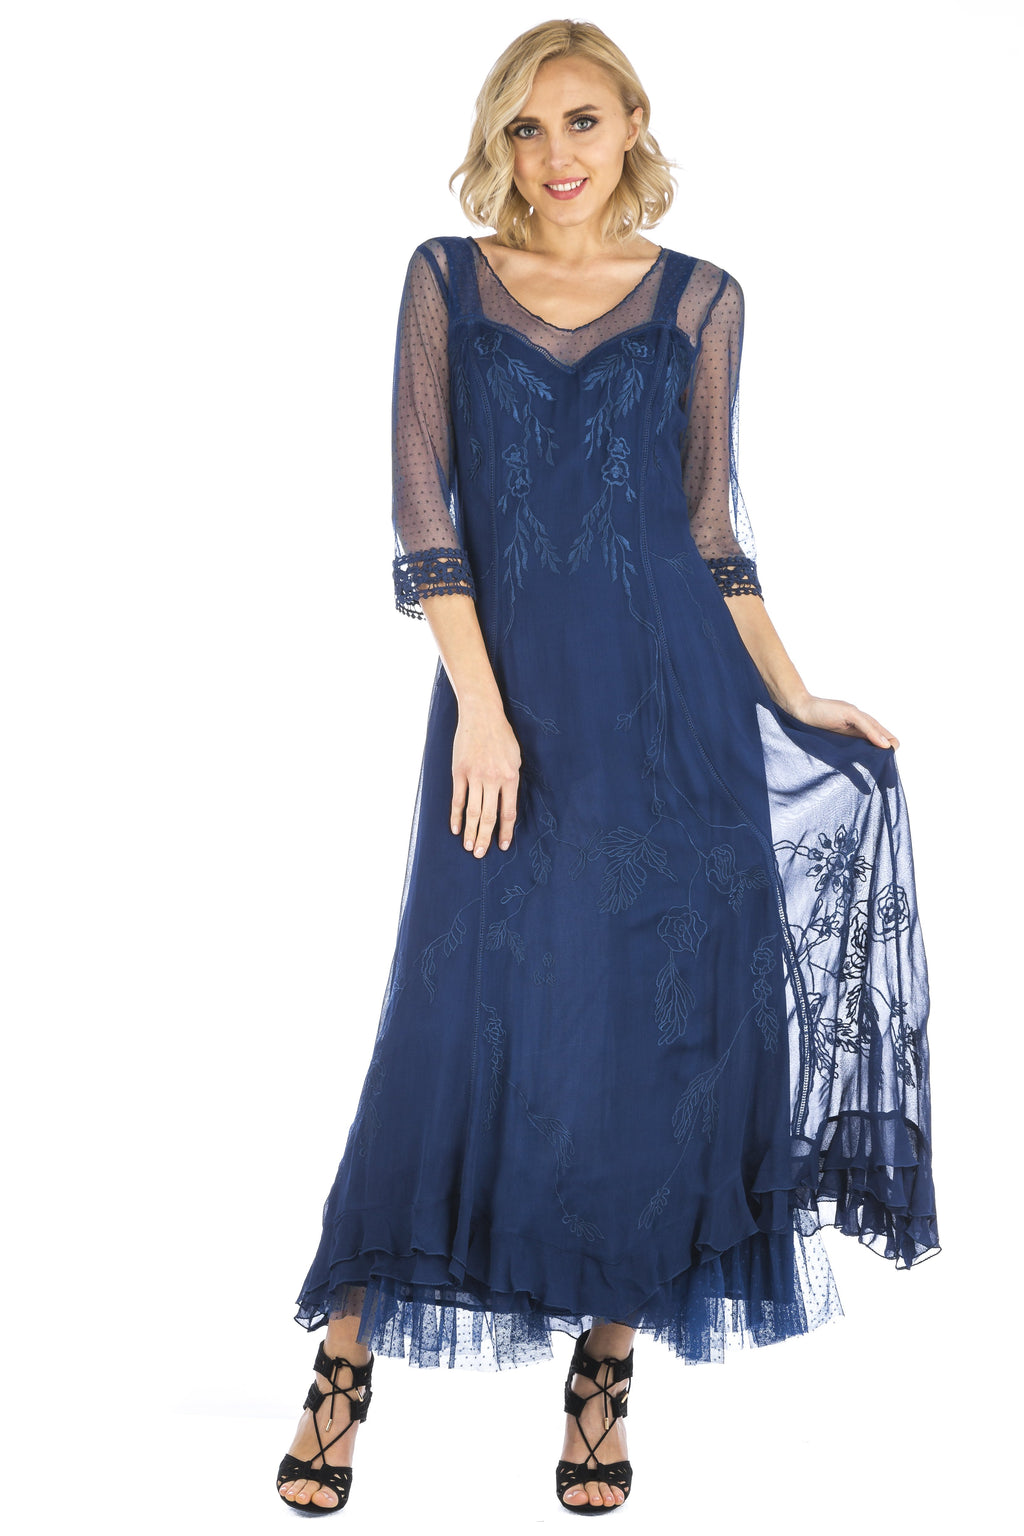 Nataya Vintage Inspired Dress Available in Royal Blue or Black- CL-068 - Blanche's Place